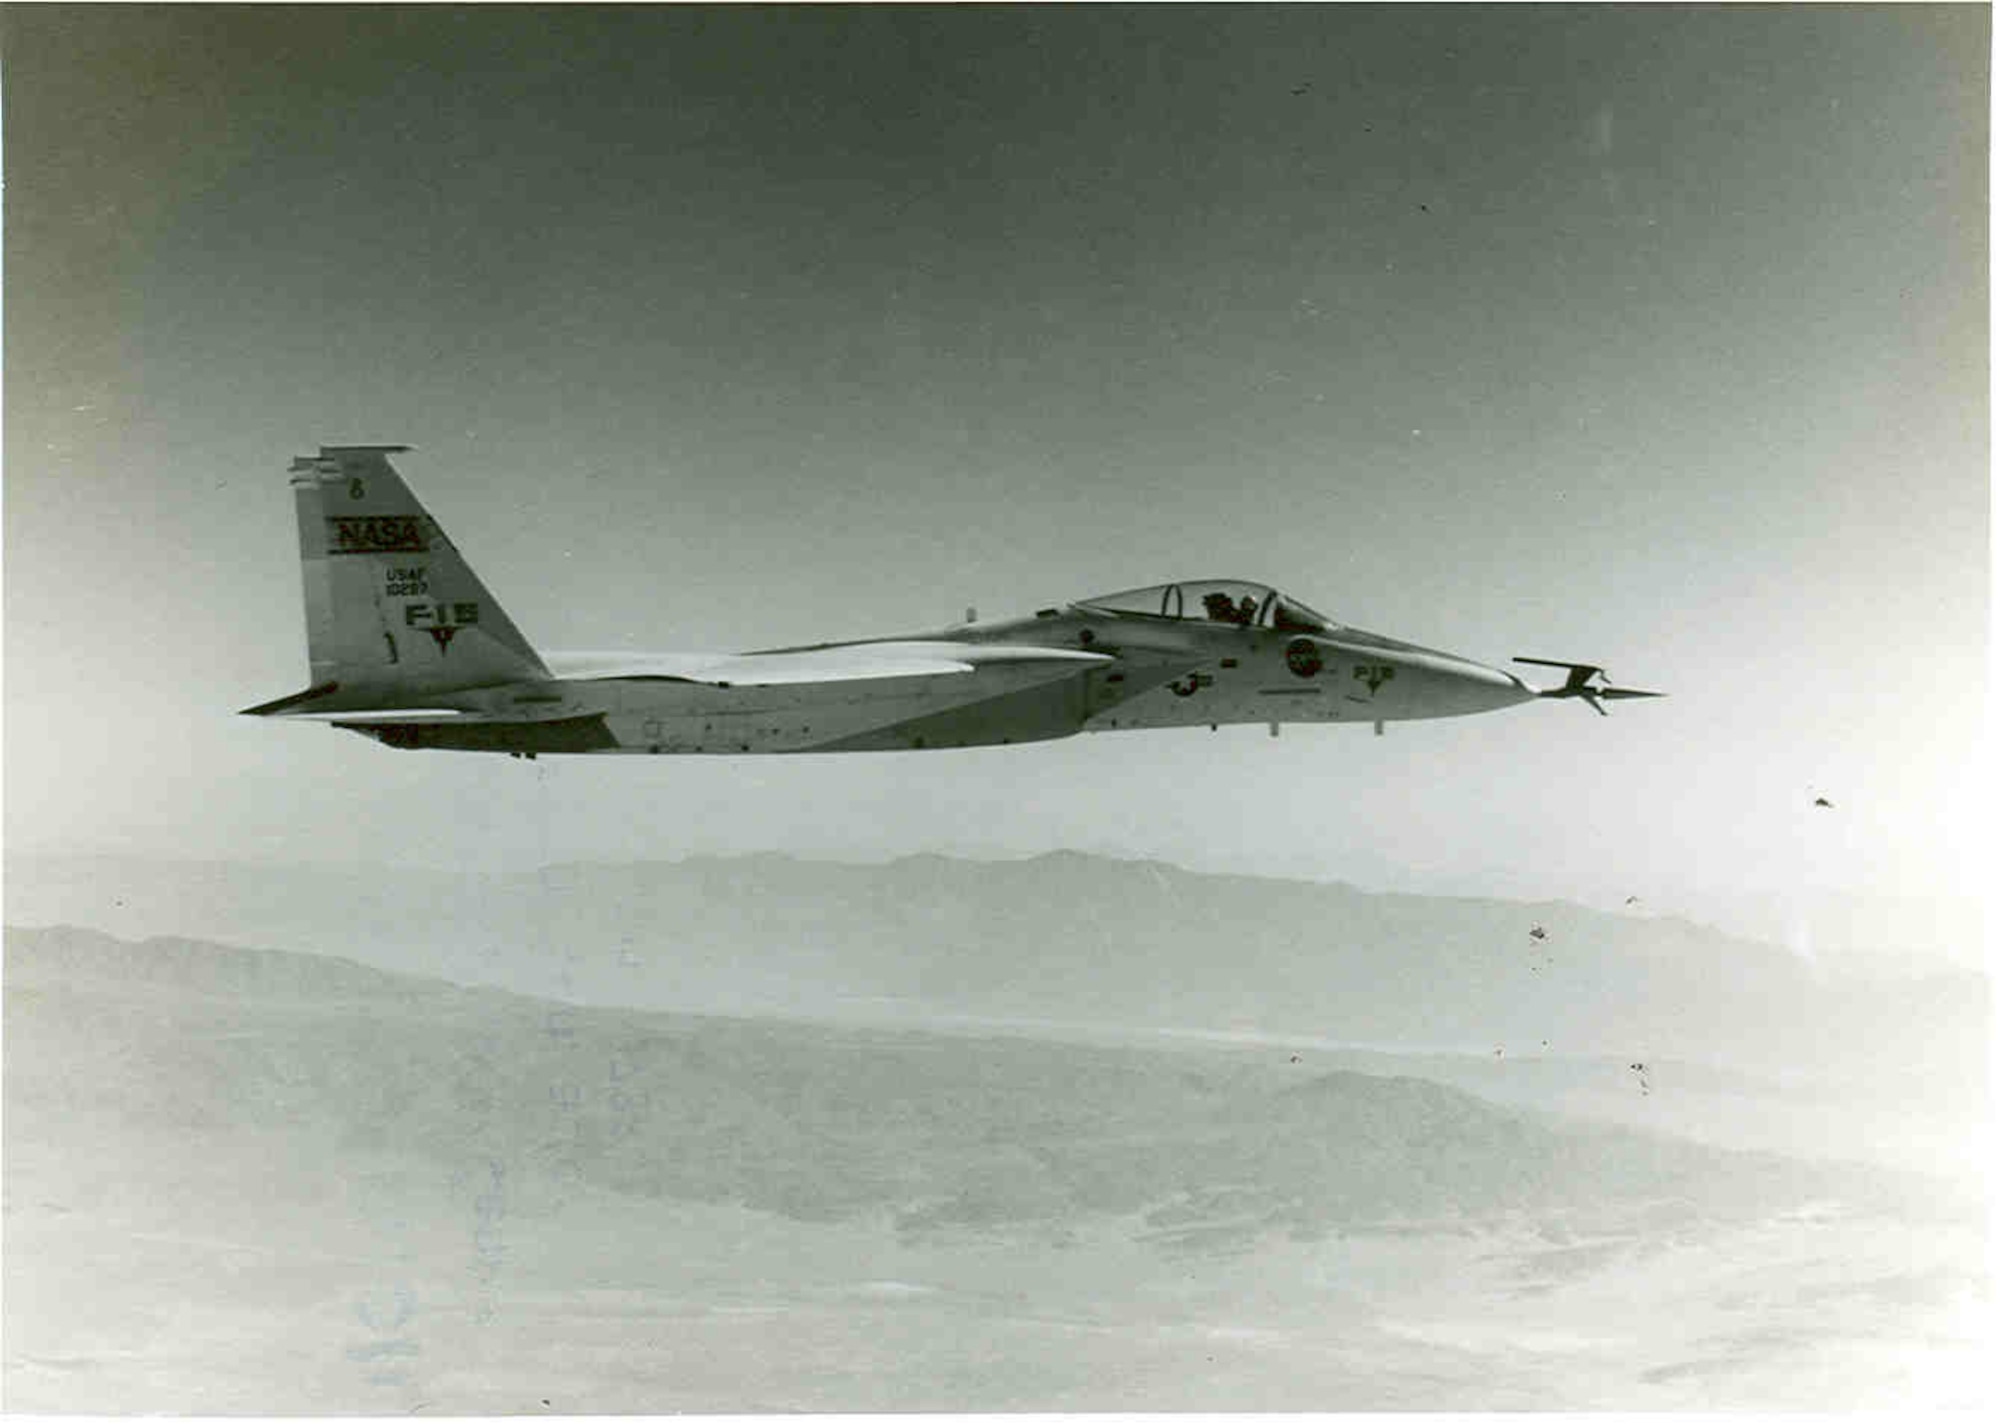 A modified F-15 Eagle is flown in the late 1970s by NASA personnel at what was then known as the Dryden Flight Research Center in California to obtain aerodynamic measurements on an instrumented cone to compare with similar data taken with the same cone in nearly two dozen foreign and domestic wind tunnels. The program originated at Arnold Engineering Development Complex, headquartered at Arnold Air Force Base, Tennessee, with the purpose of developing a mathematical means of eliminating noise effects from wind tunnel data to improve its correlation with flight data. The Air Force recently celebrated the 50th anniversary of the F-15’s deployment. Models of the aircraft, engines and other F-15 components have frequently been tested by AEDC over the past 50 years. (U.S. Air Force photo)